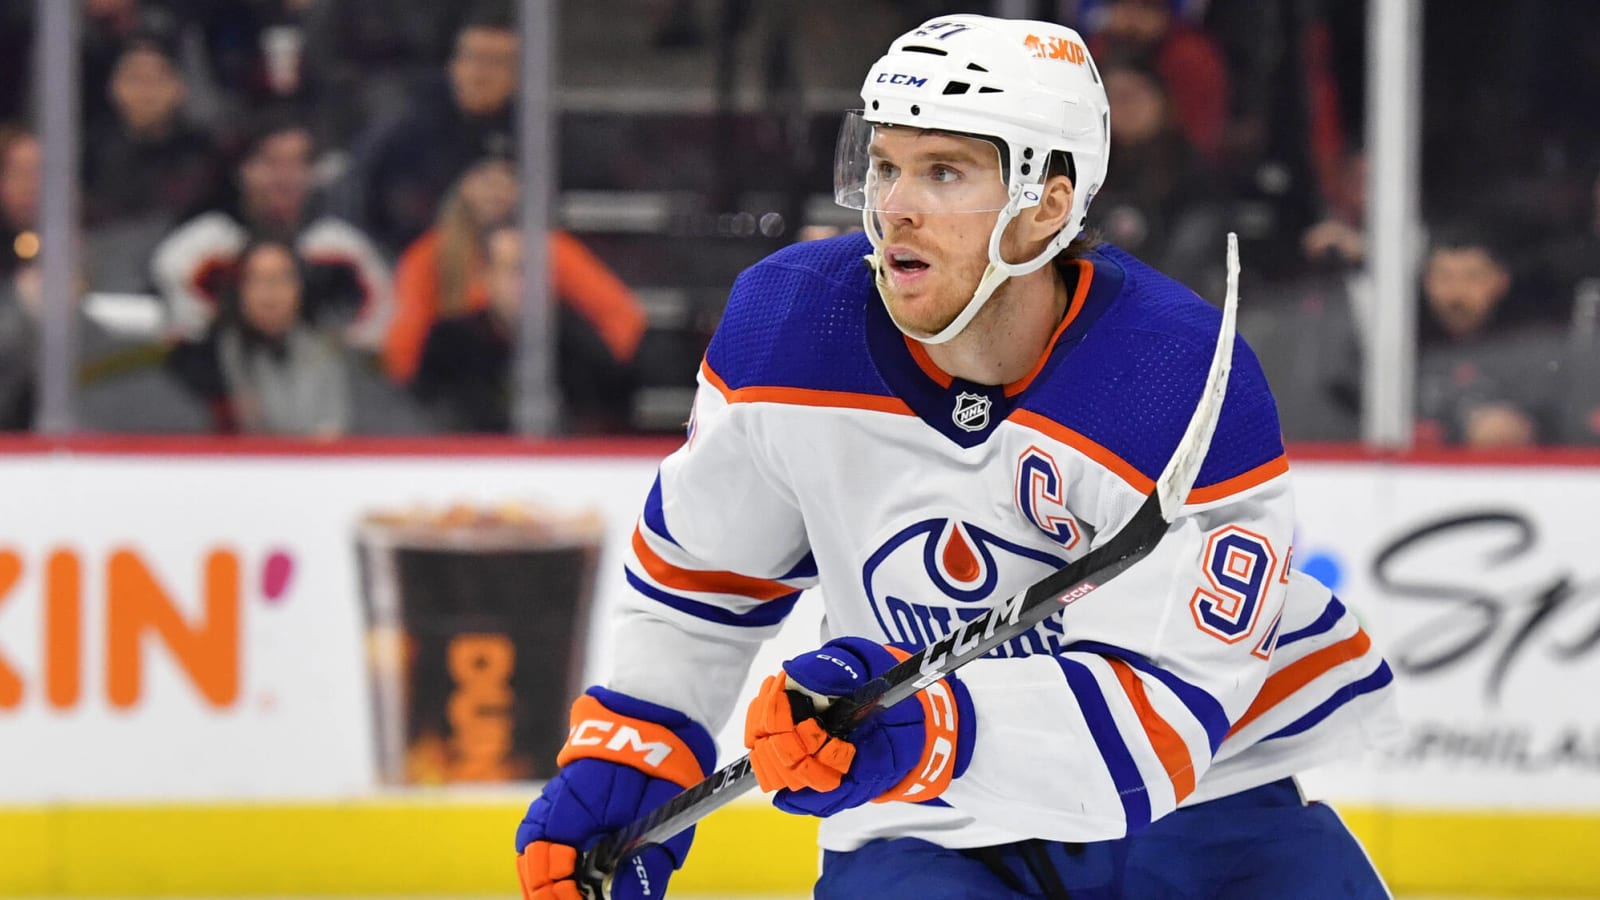 McDavid becomes first player to score 100 points this season